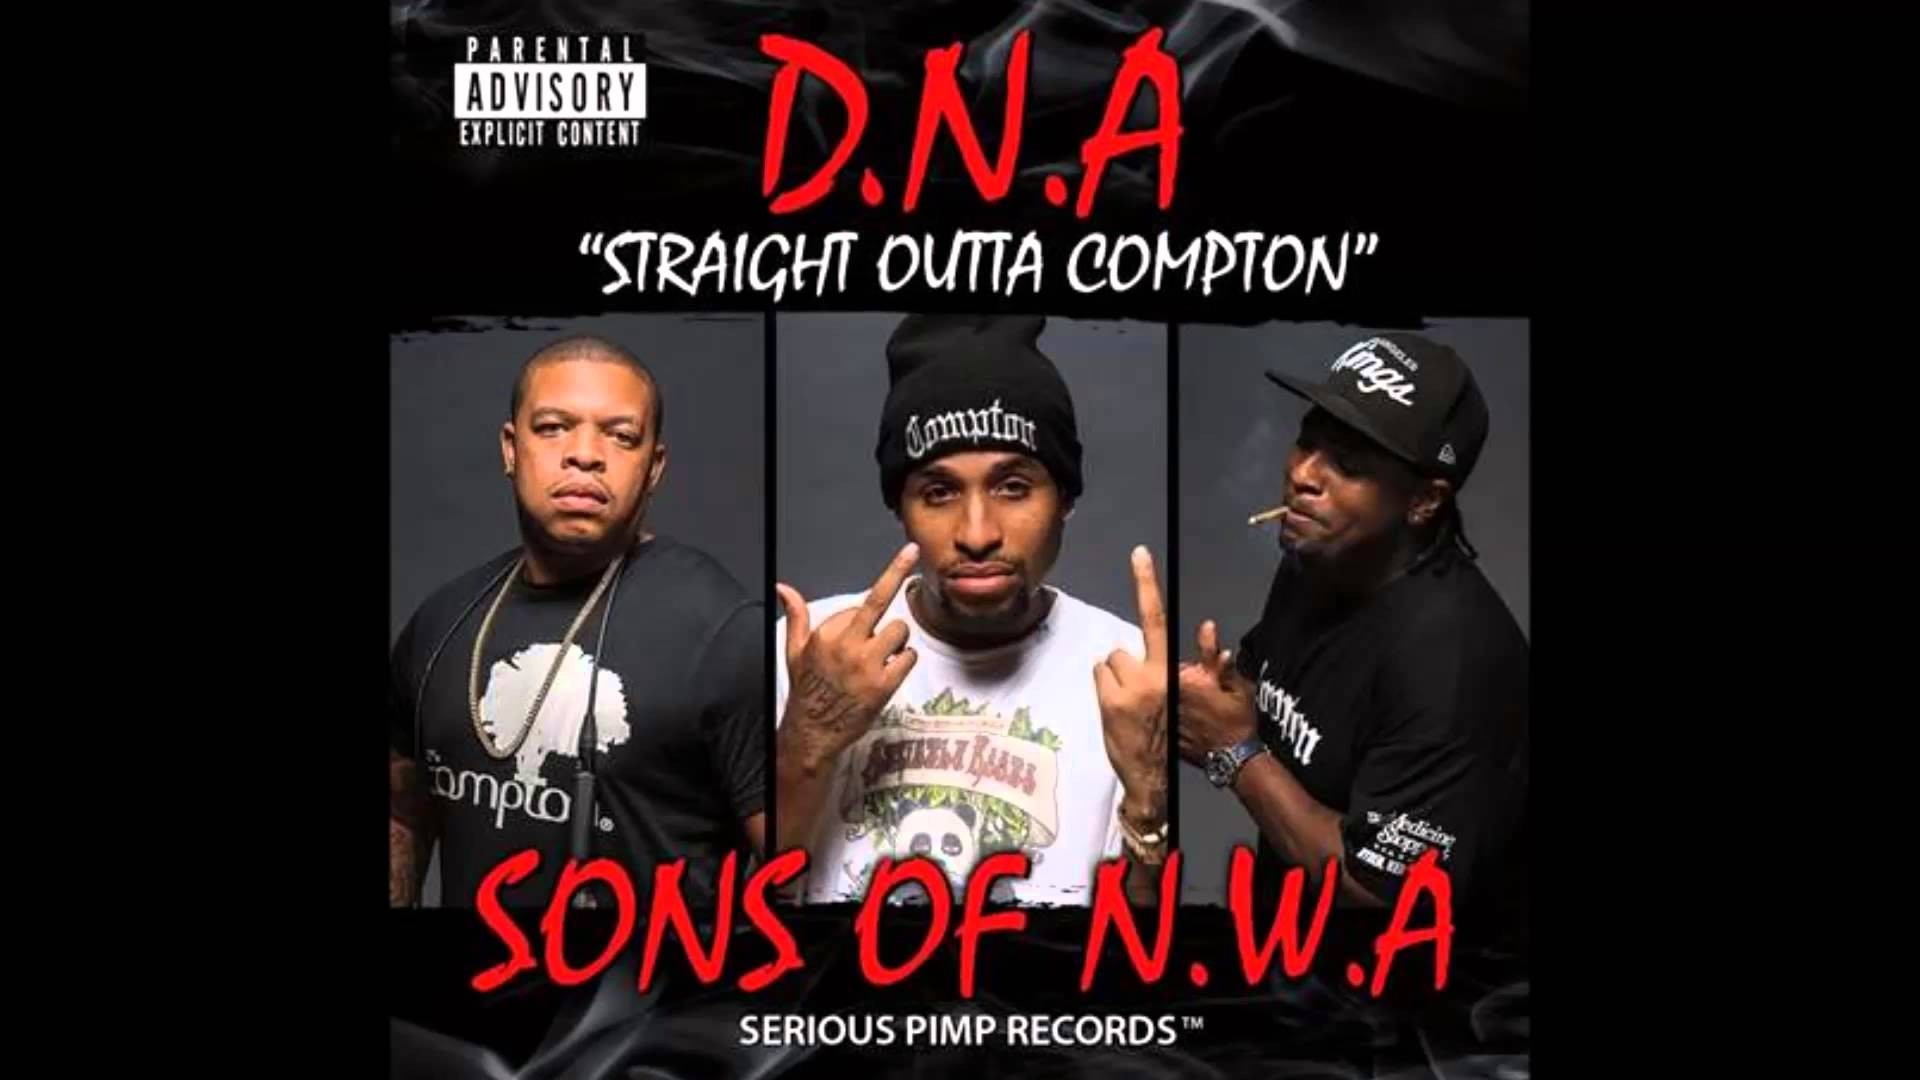 1920x1080  Sons of N.W.A. - Straight Outta Compton - YouTube